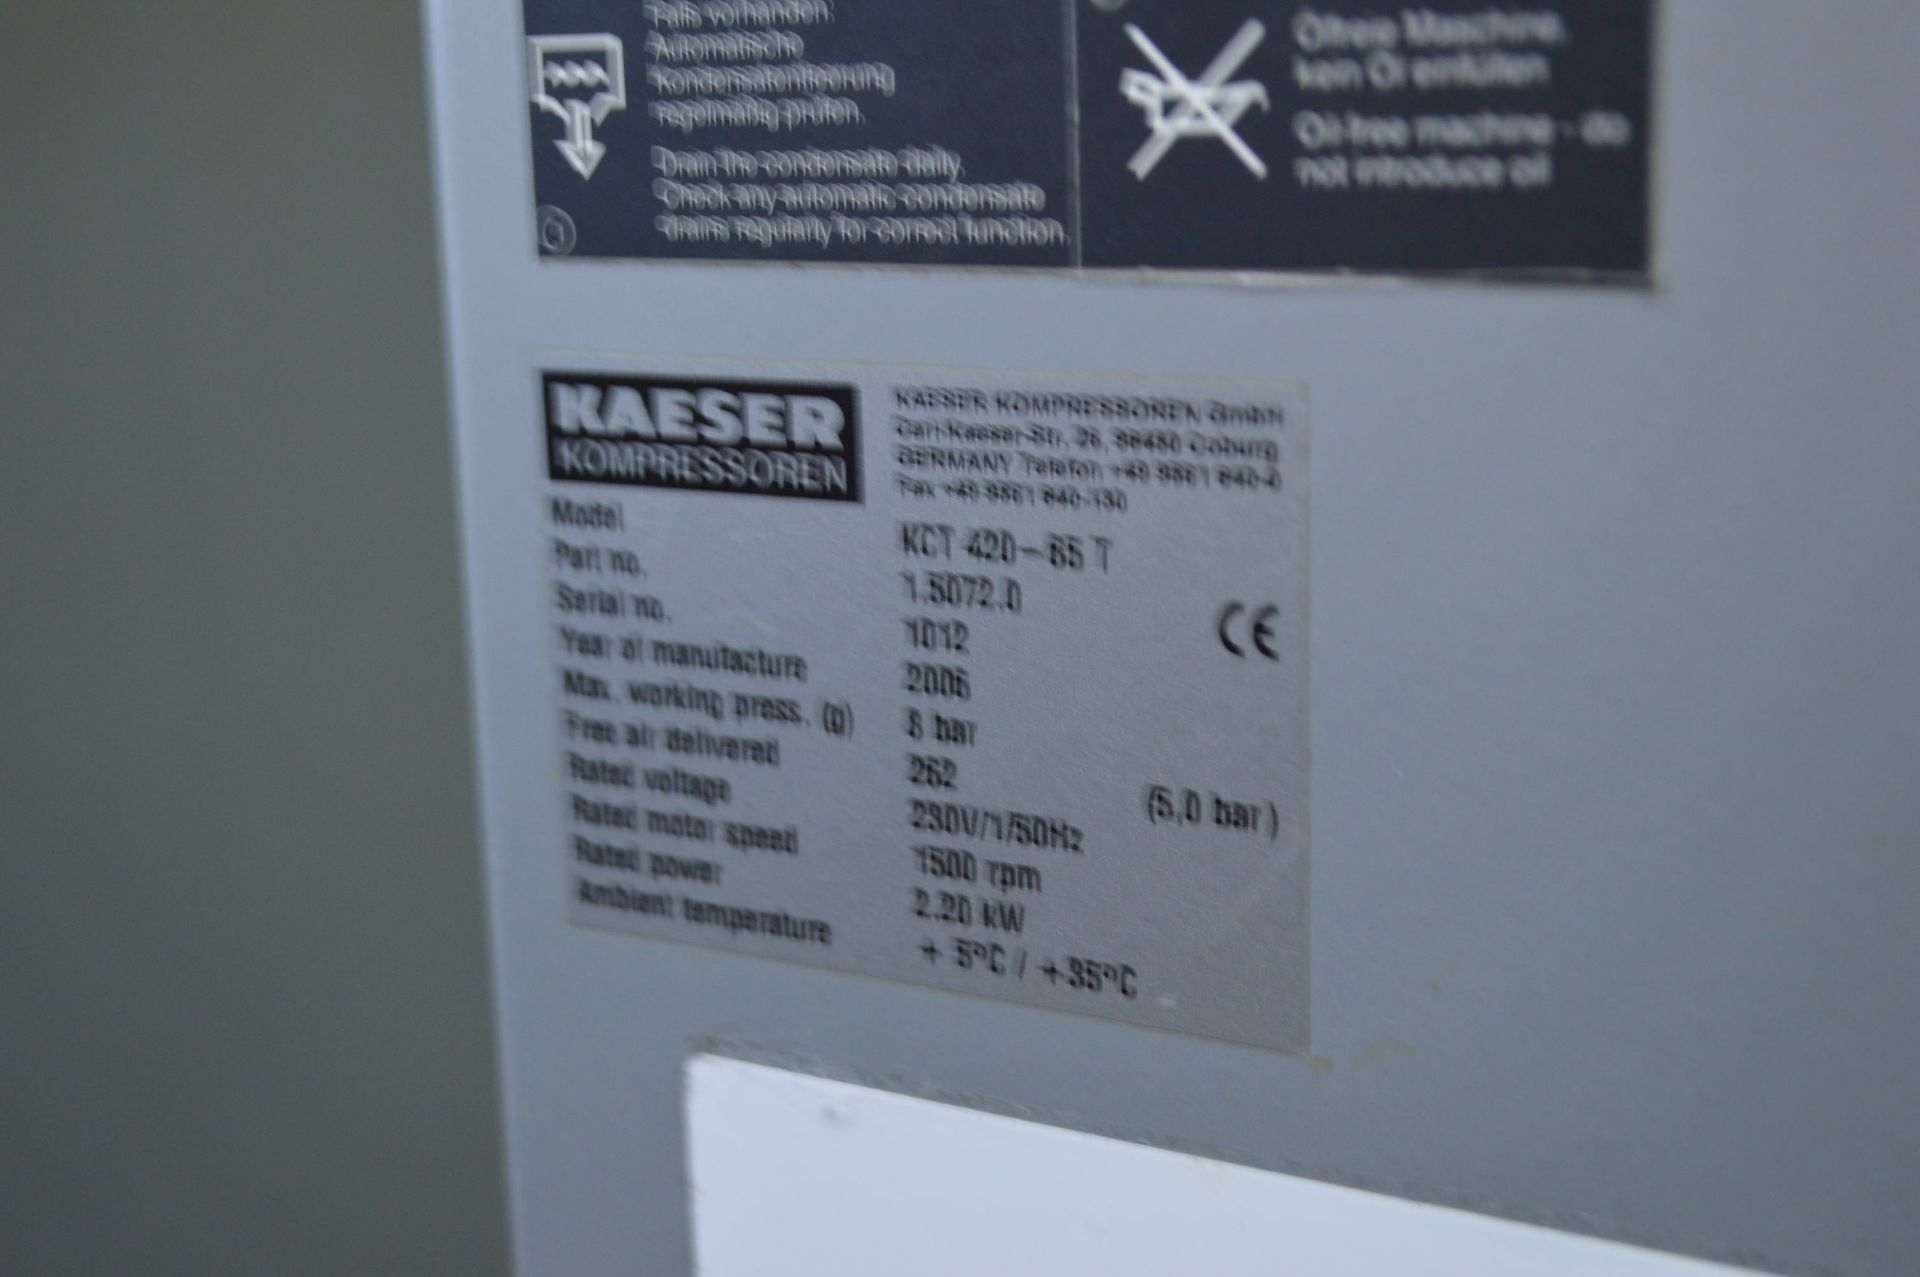 Kaeser KCT420-65T Package Air Compressor, serial no. 1012, year of manufacture 2006. This lot must - Bild 2 aus 2